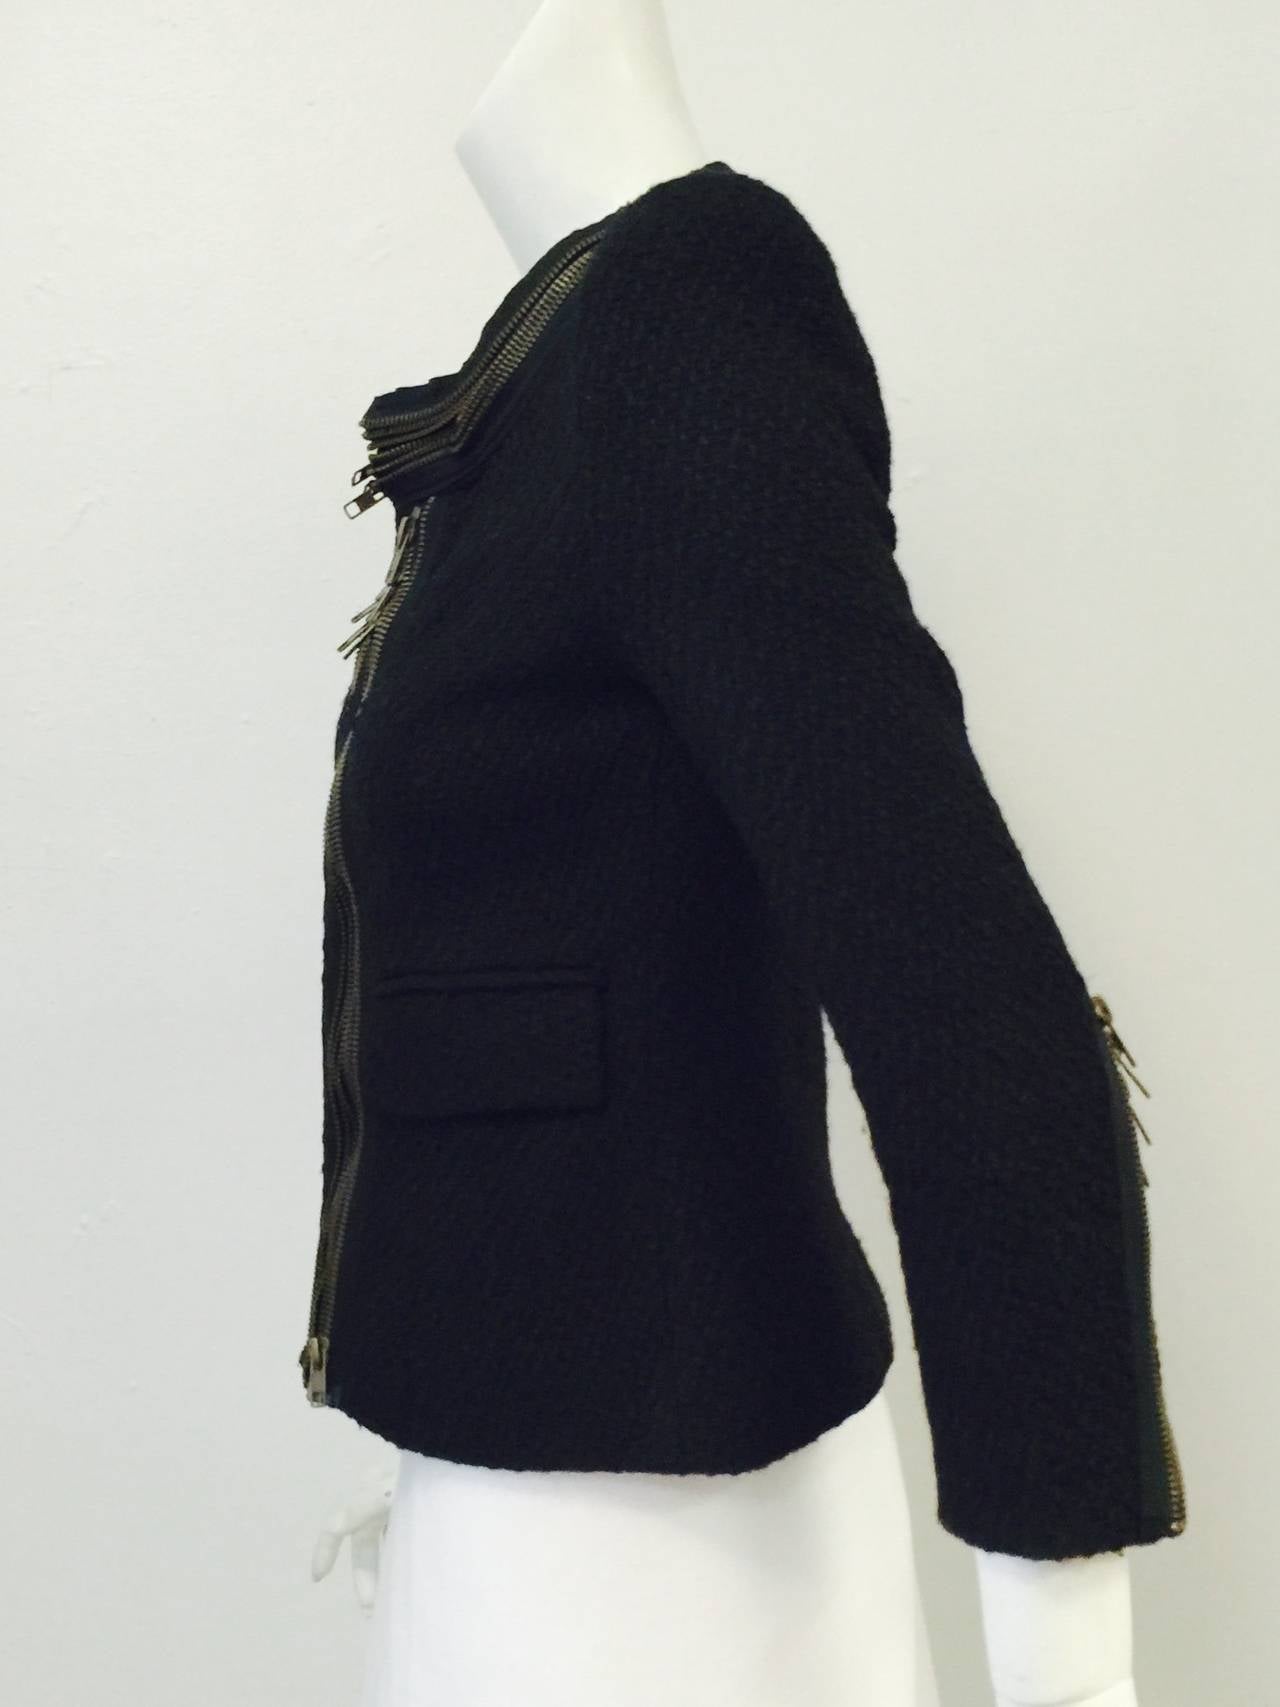 Alexander McQueen Cropped Textured Jacket With Multi Zipper Trim In Excellent Condition For Sale In Palm Beach, FL